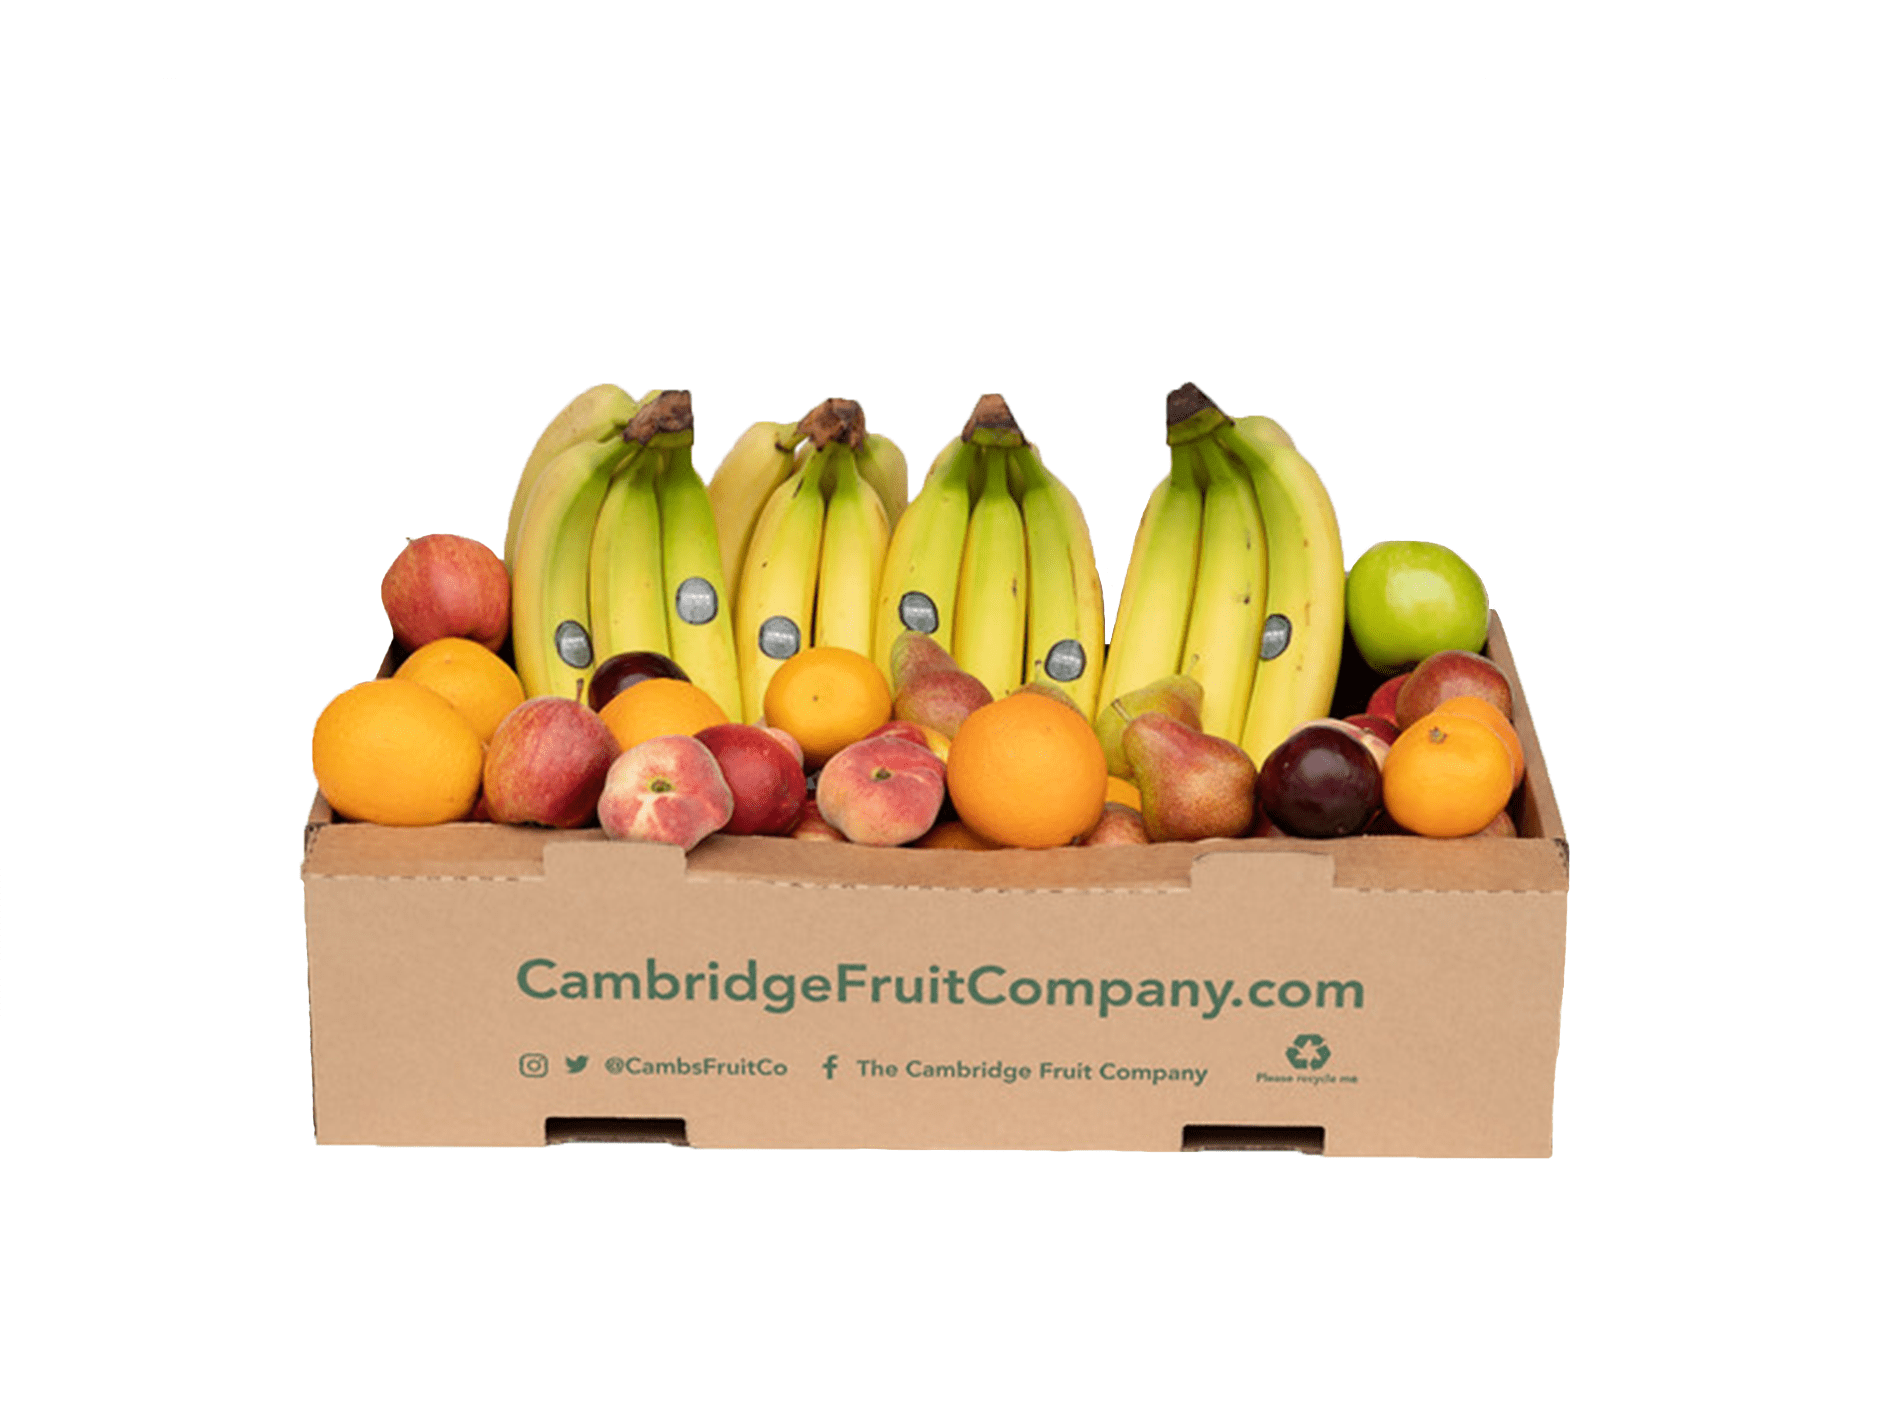 Workplace Office Corporate Fruit Box Delivery - Cambridge Fruit Company